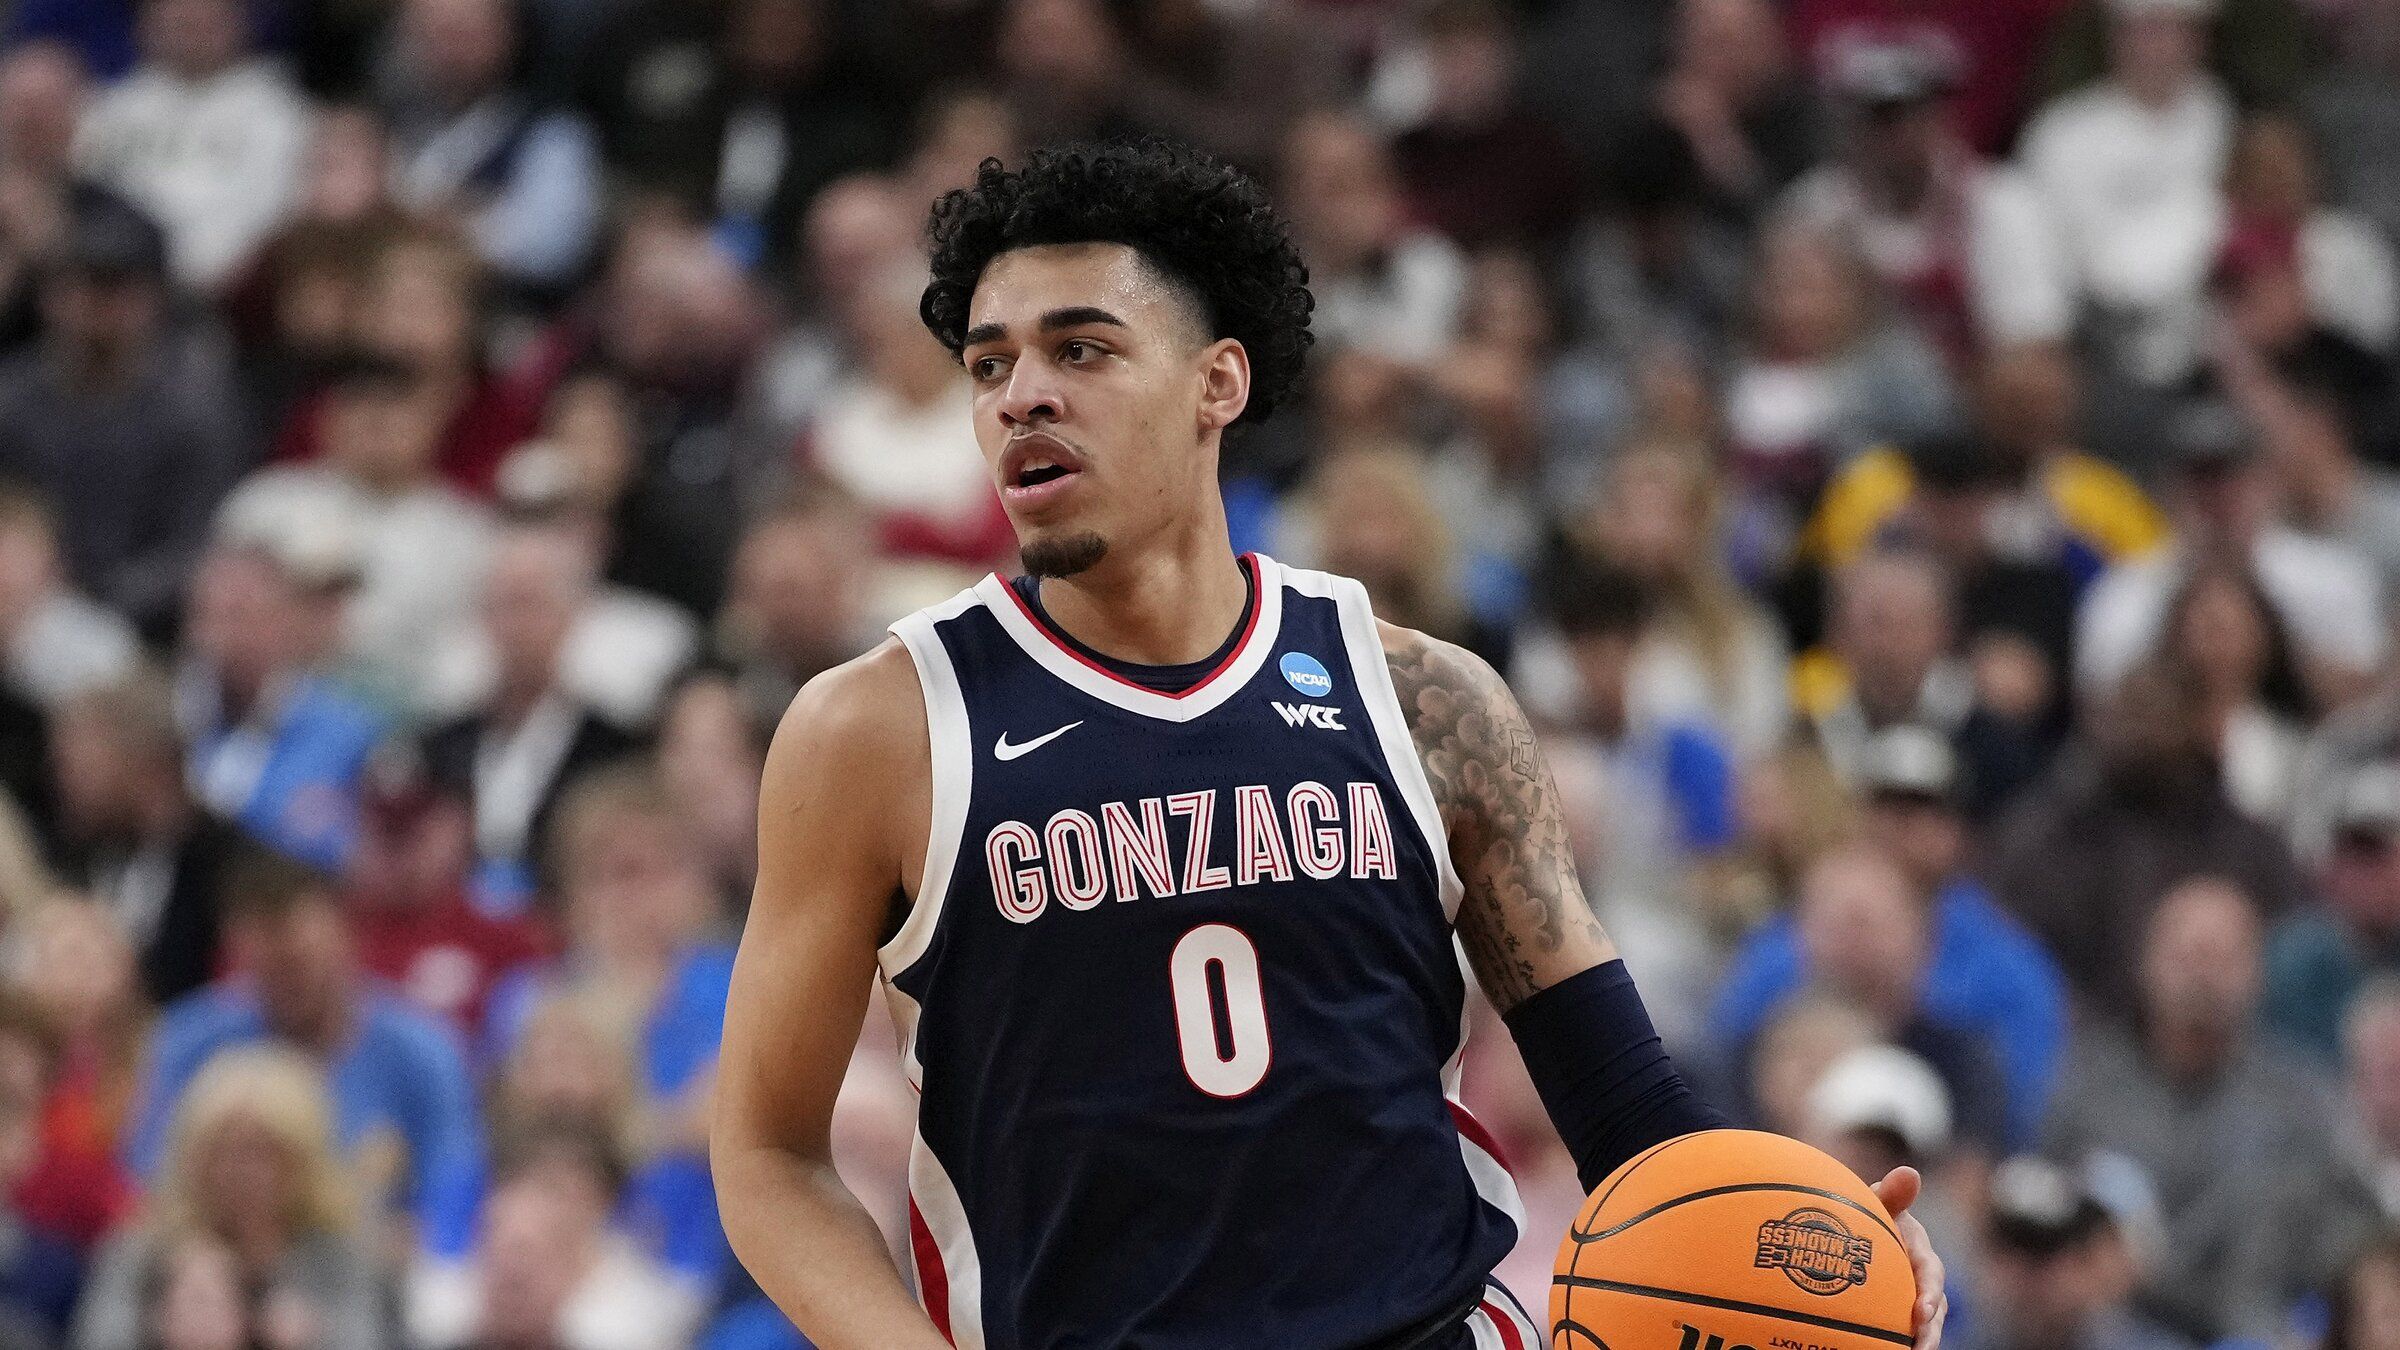 Gonzaga's Julian Strawther picked late in first round by NBA